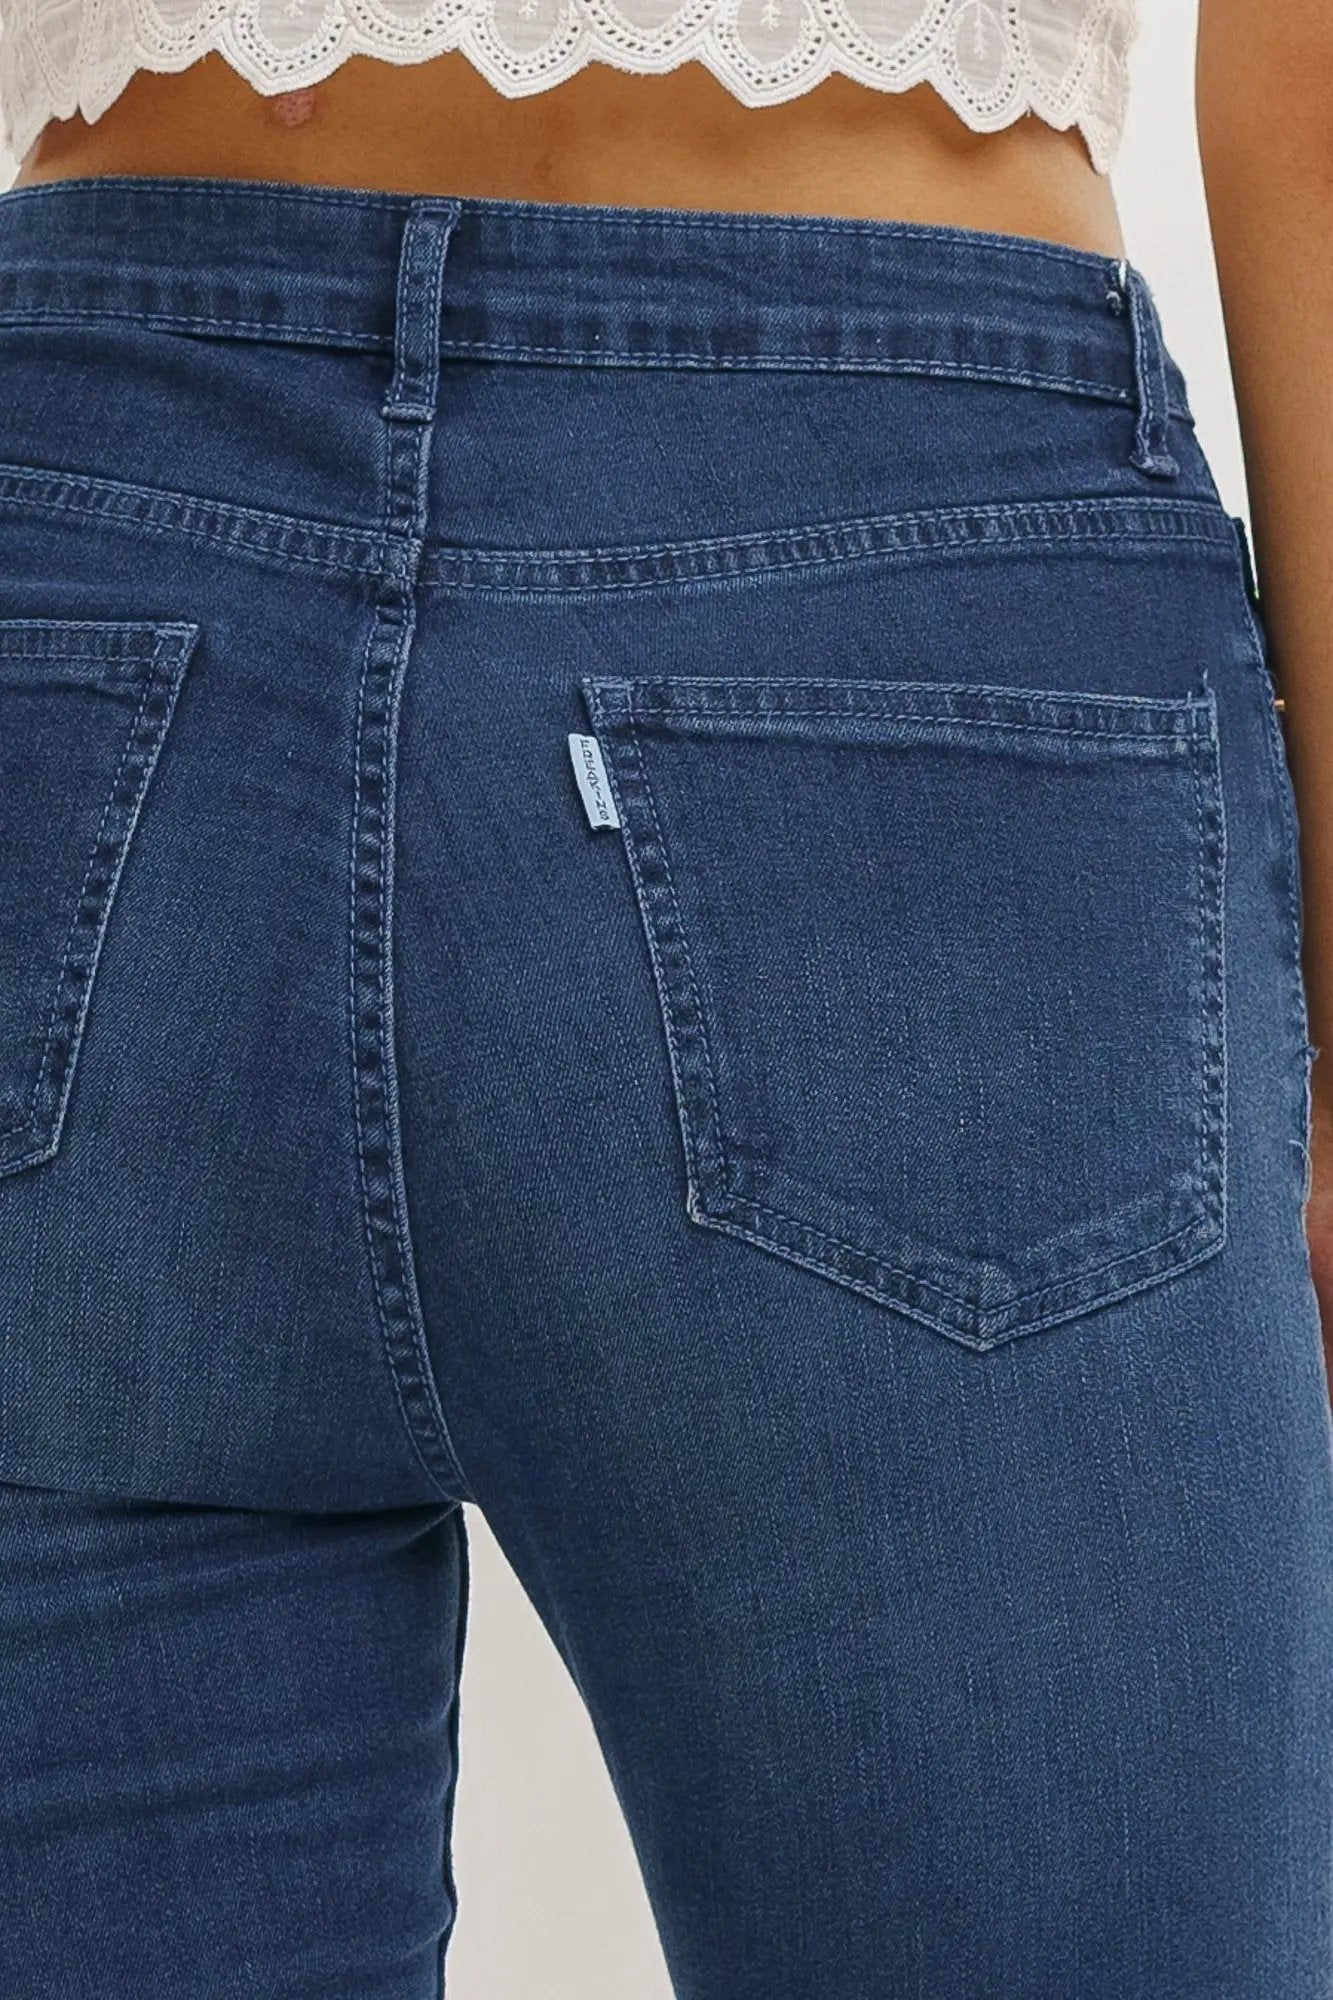 Abercrombie Jean Sizing Review - an indigo day